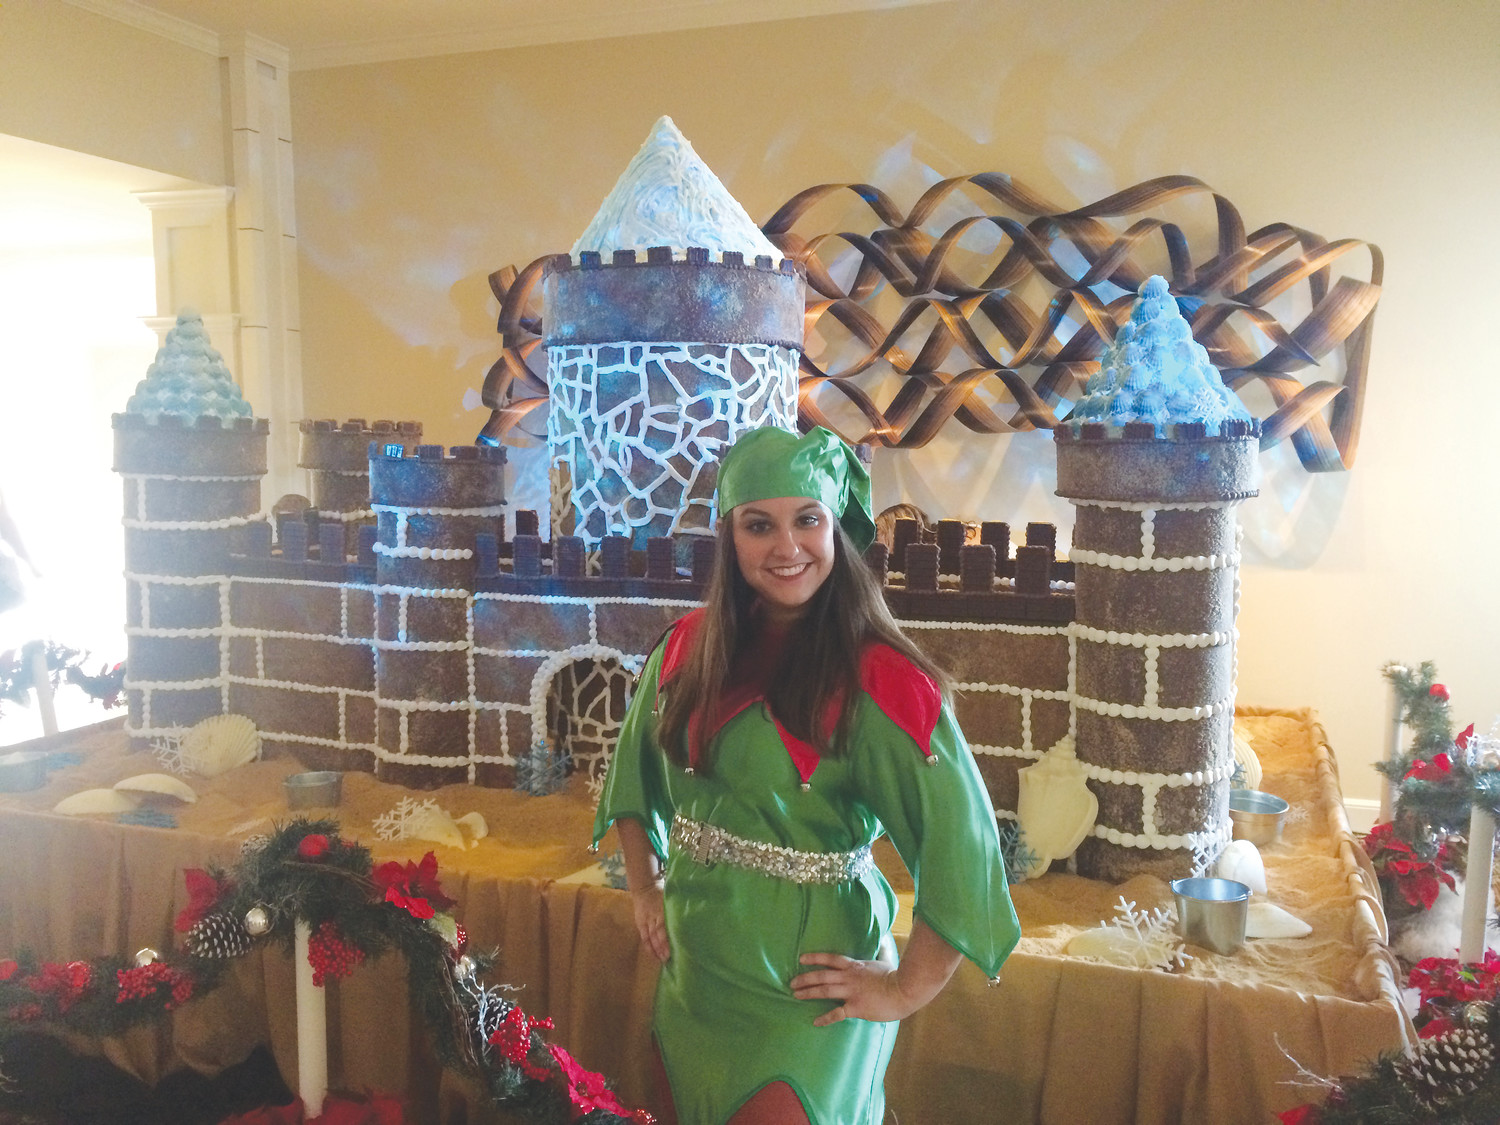 A One Ocean Resort & Spa employee dressed in Christmas attire poses for a photo in front of the gingerbread castle.